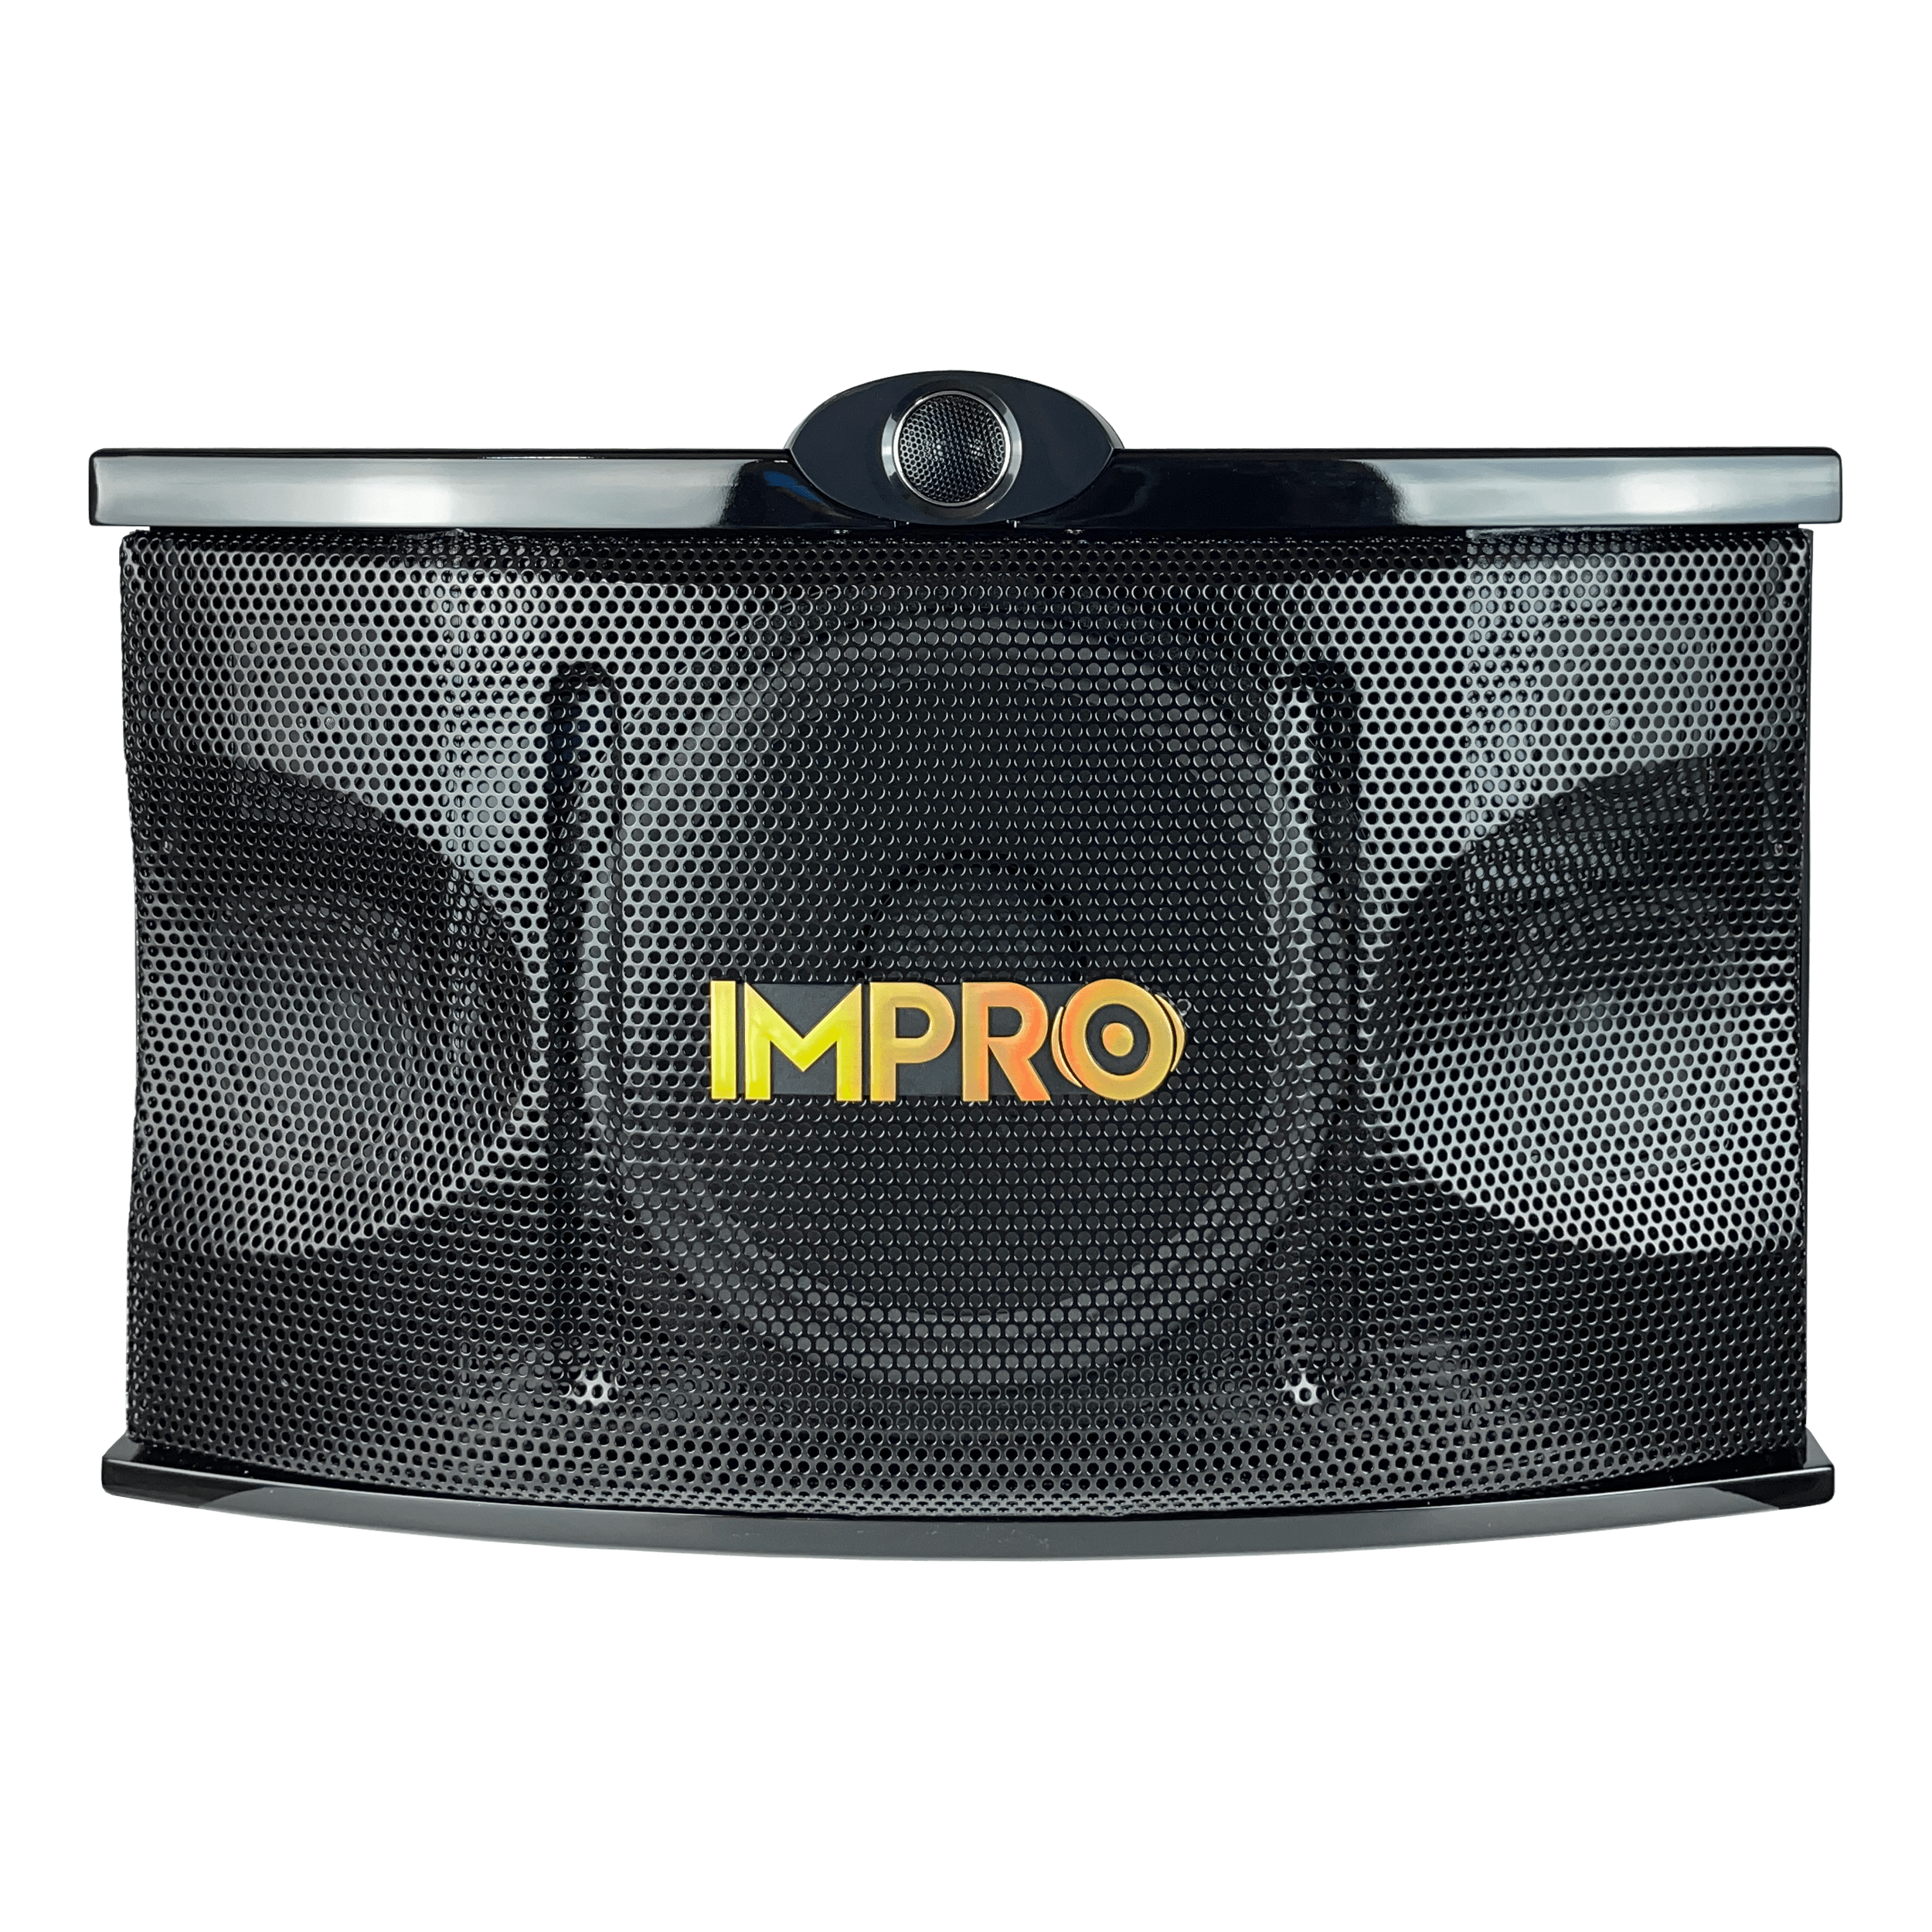 ImPro Encore Elite Plus Bundle with Mixing Amplifier, Speakers, Microphones, Subwoofer and Accessories